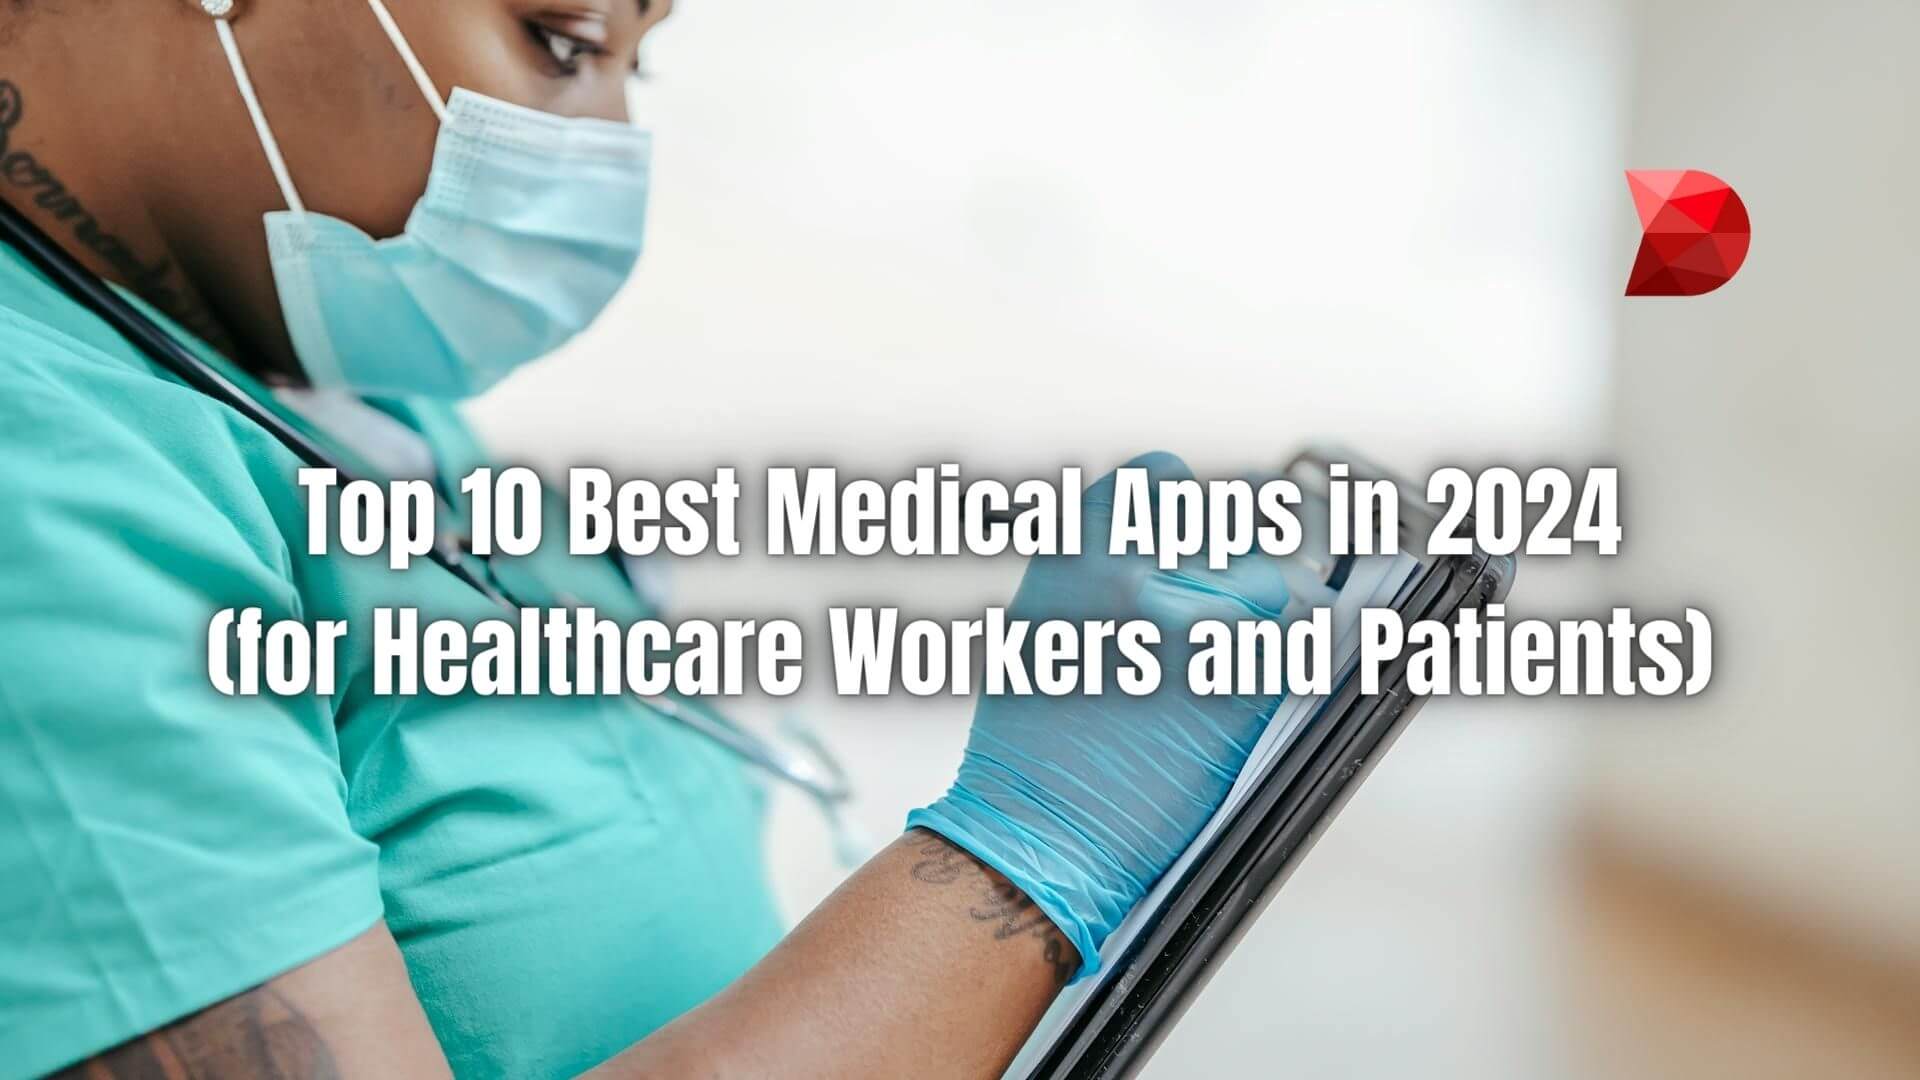 Unlock the potential of medical technology! Explore our guide to the top 10 medical apps in 2024, revolutionizing healthcare delivery.